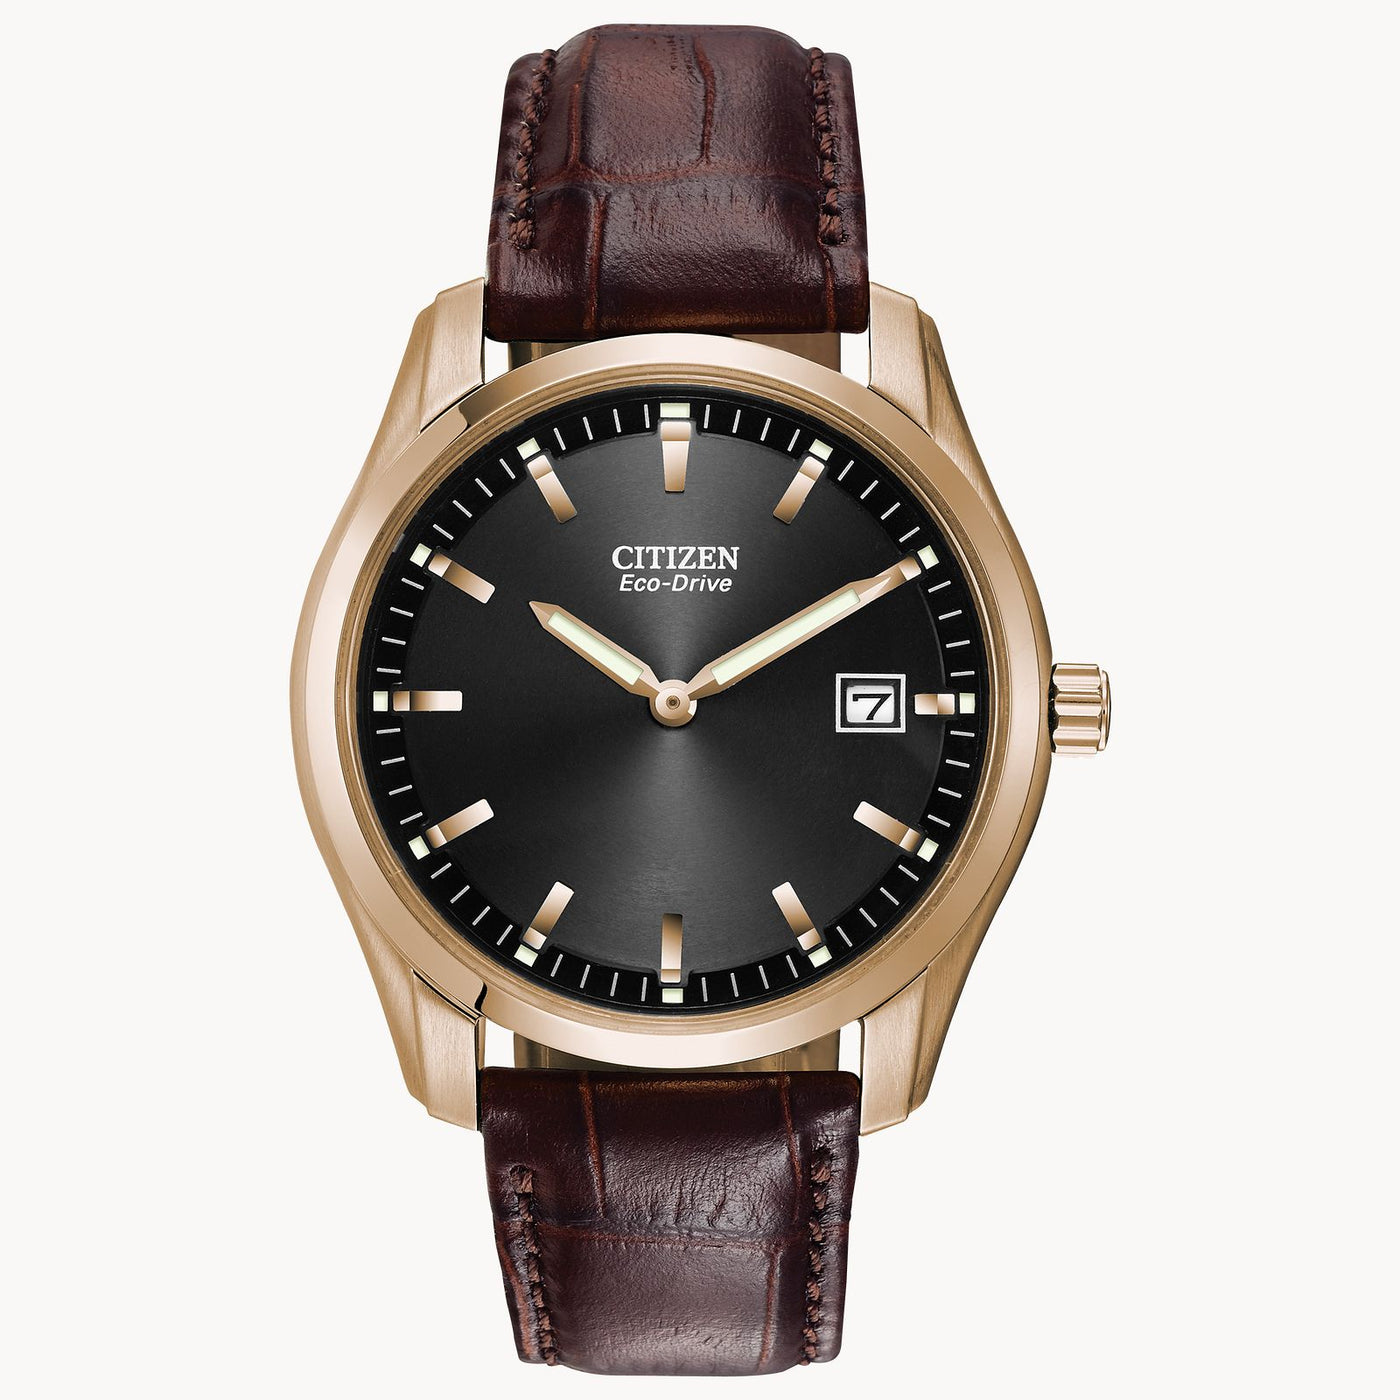 Citizen men's watch rose gold tone black dial with luminous hands and date